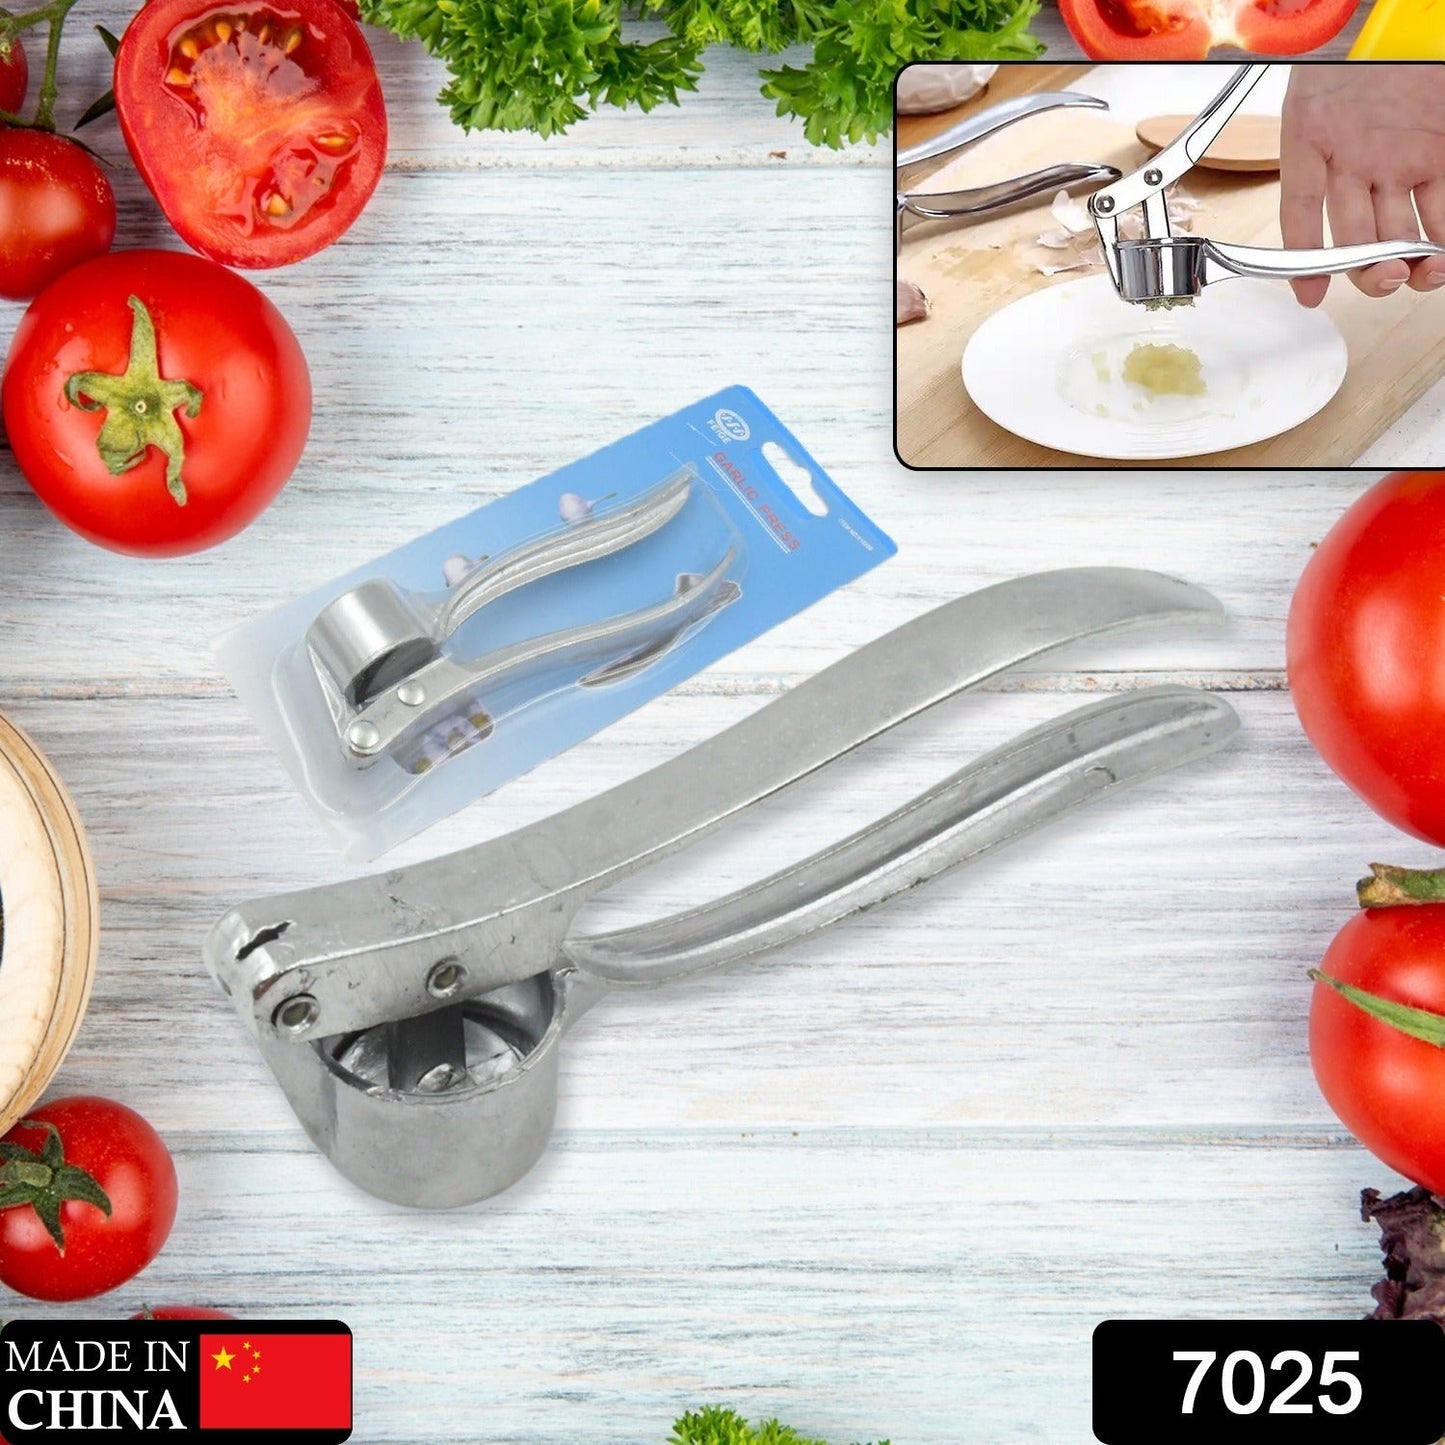 7025 GARLIC PRESS ALL ALUMINUM EASY TO USE WITH LIGHT WEIGHT WITHOUT DIFFICULTY COOKING BAKING, KITCHEN TOOL, DISHWAHER SAFE (1 Pc)